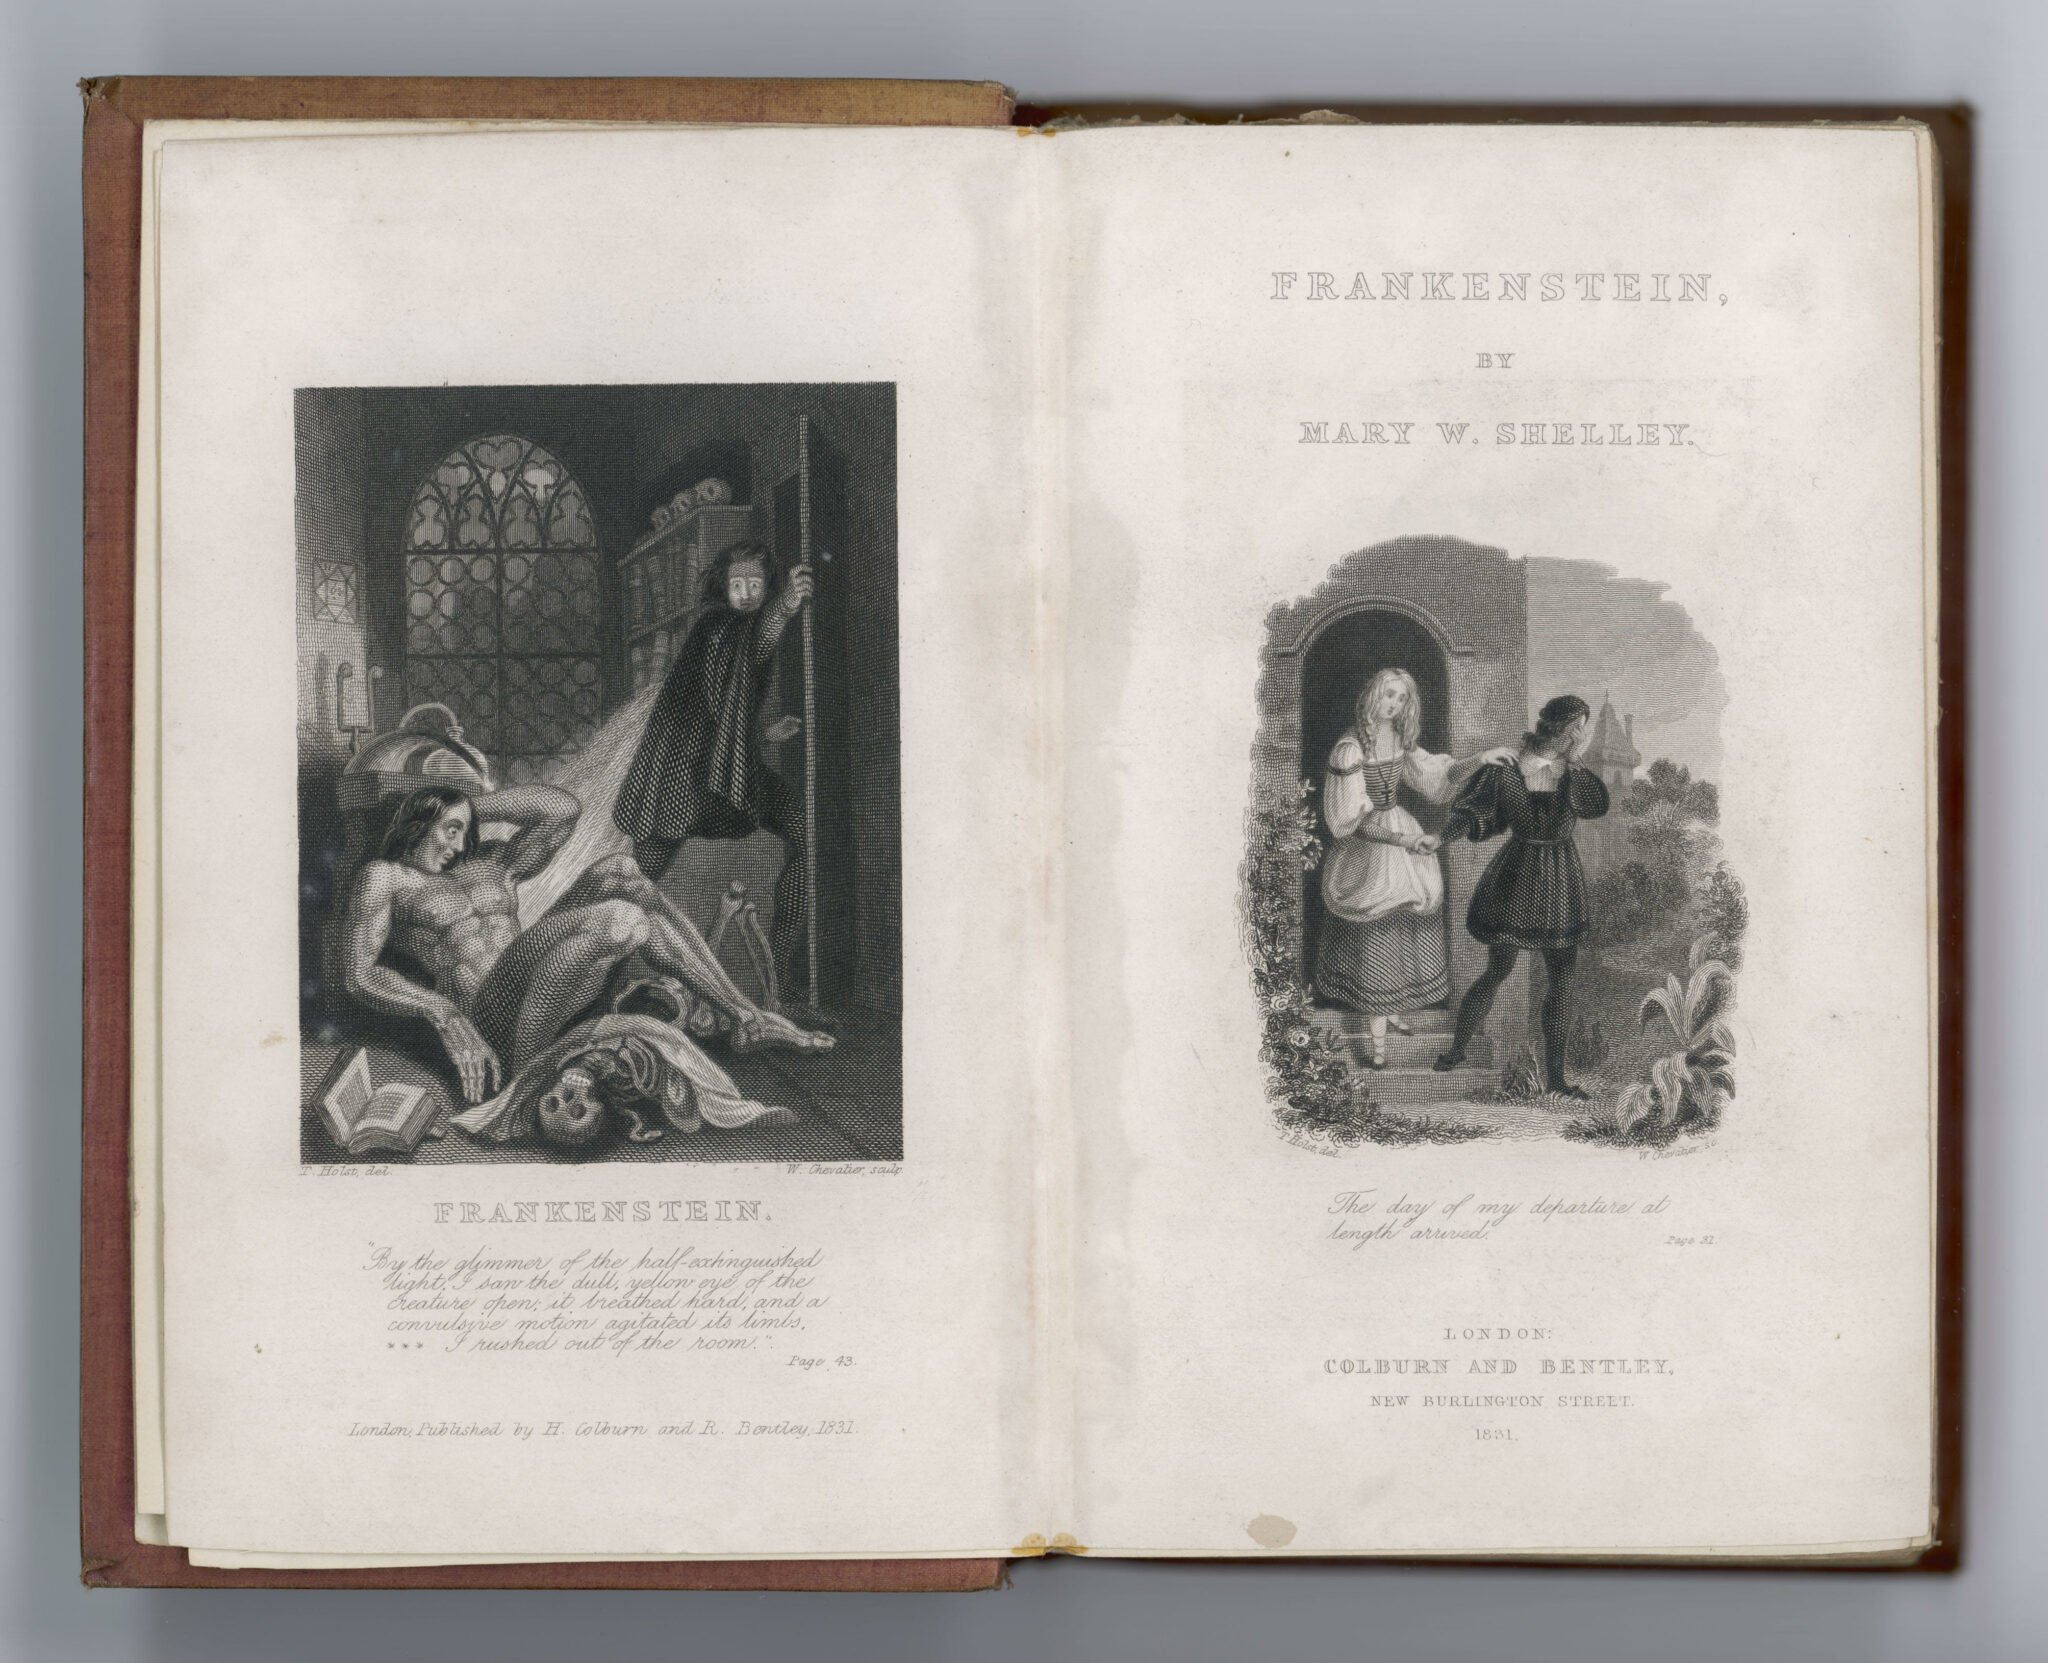 ‘Conclusions most forbidden’: Frankenstein and the Romantic Hero ...